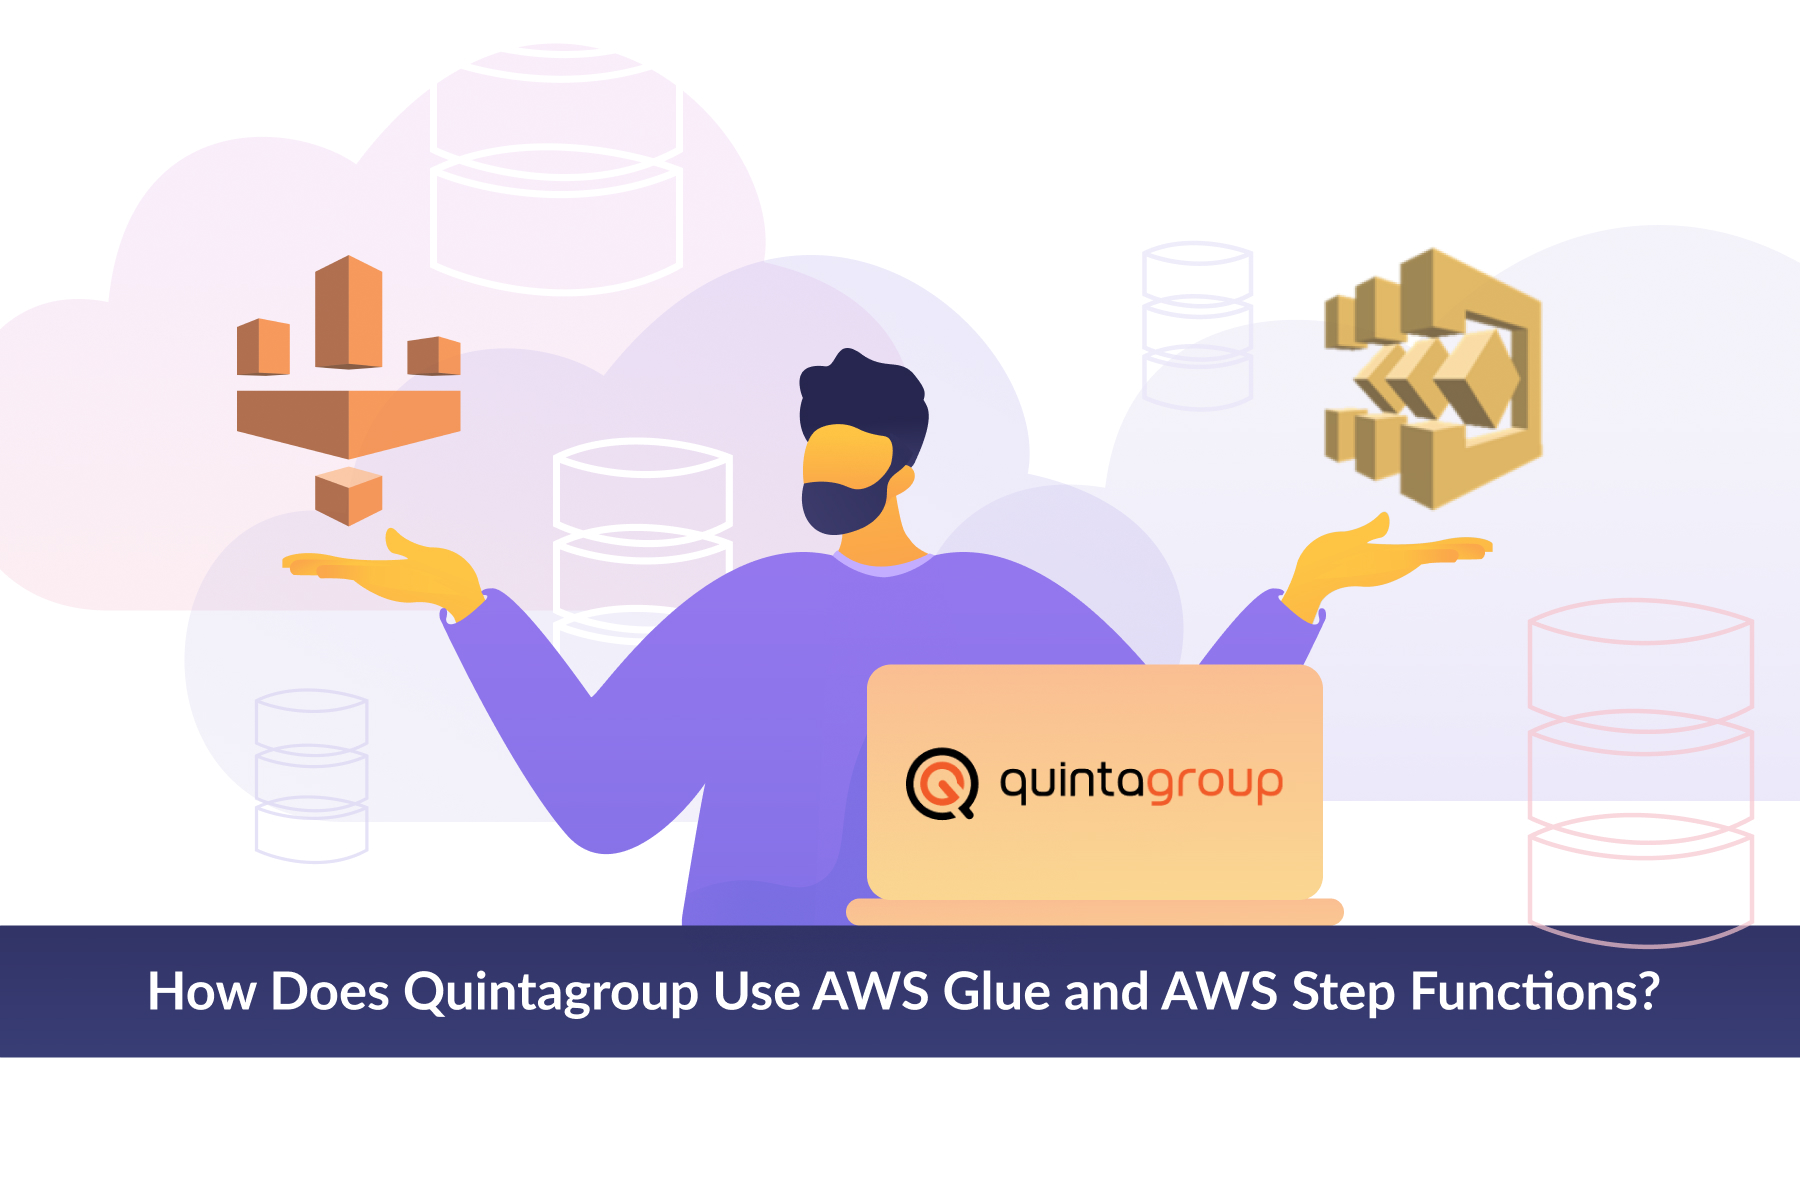 quintagroup uses aws glue and aws step functions